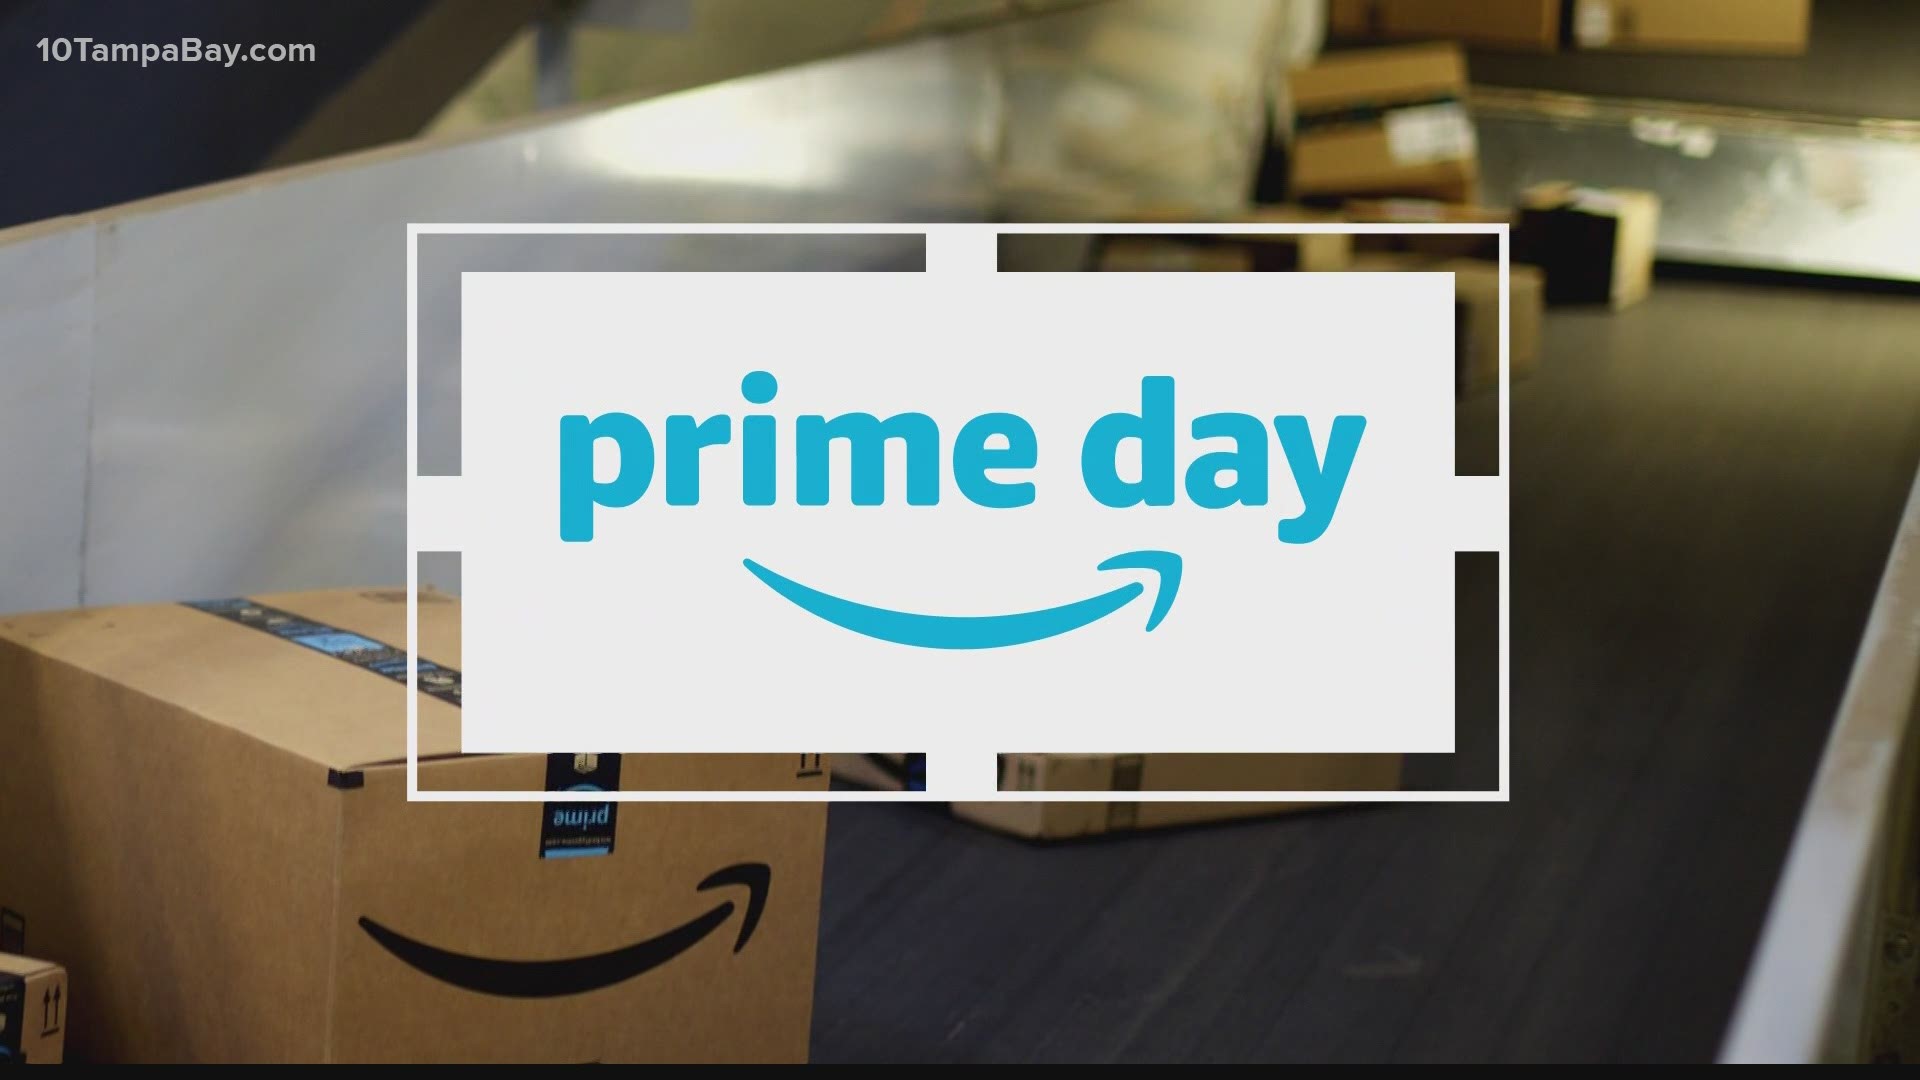 Amazon's "Prime Day" event may be the headliner, but it's far from the only sale deal-seeking shoppers will find this week.